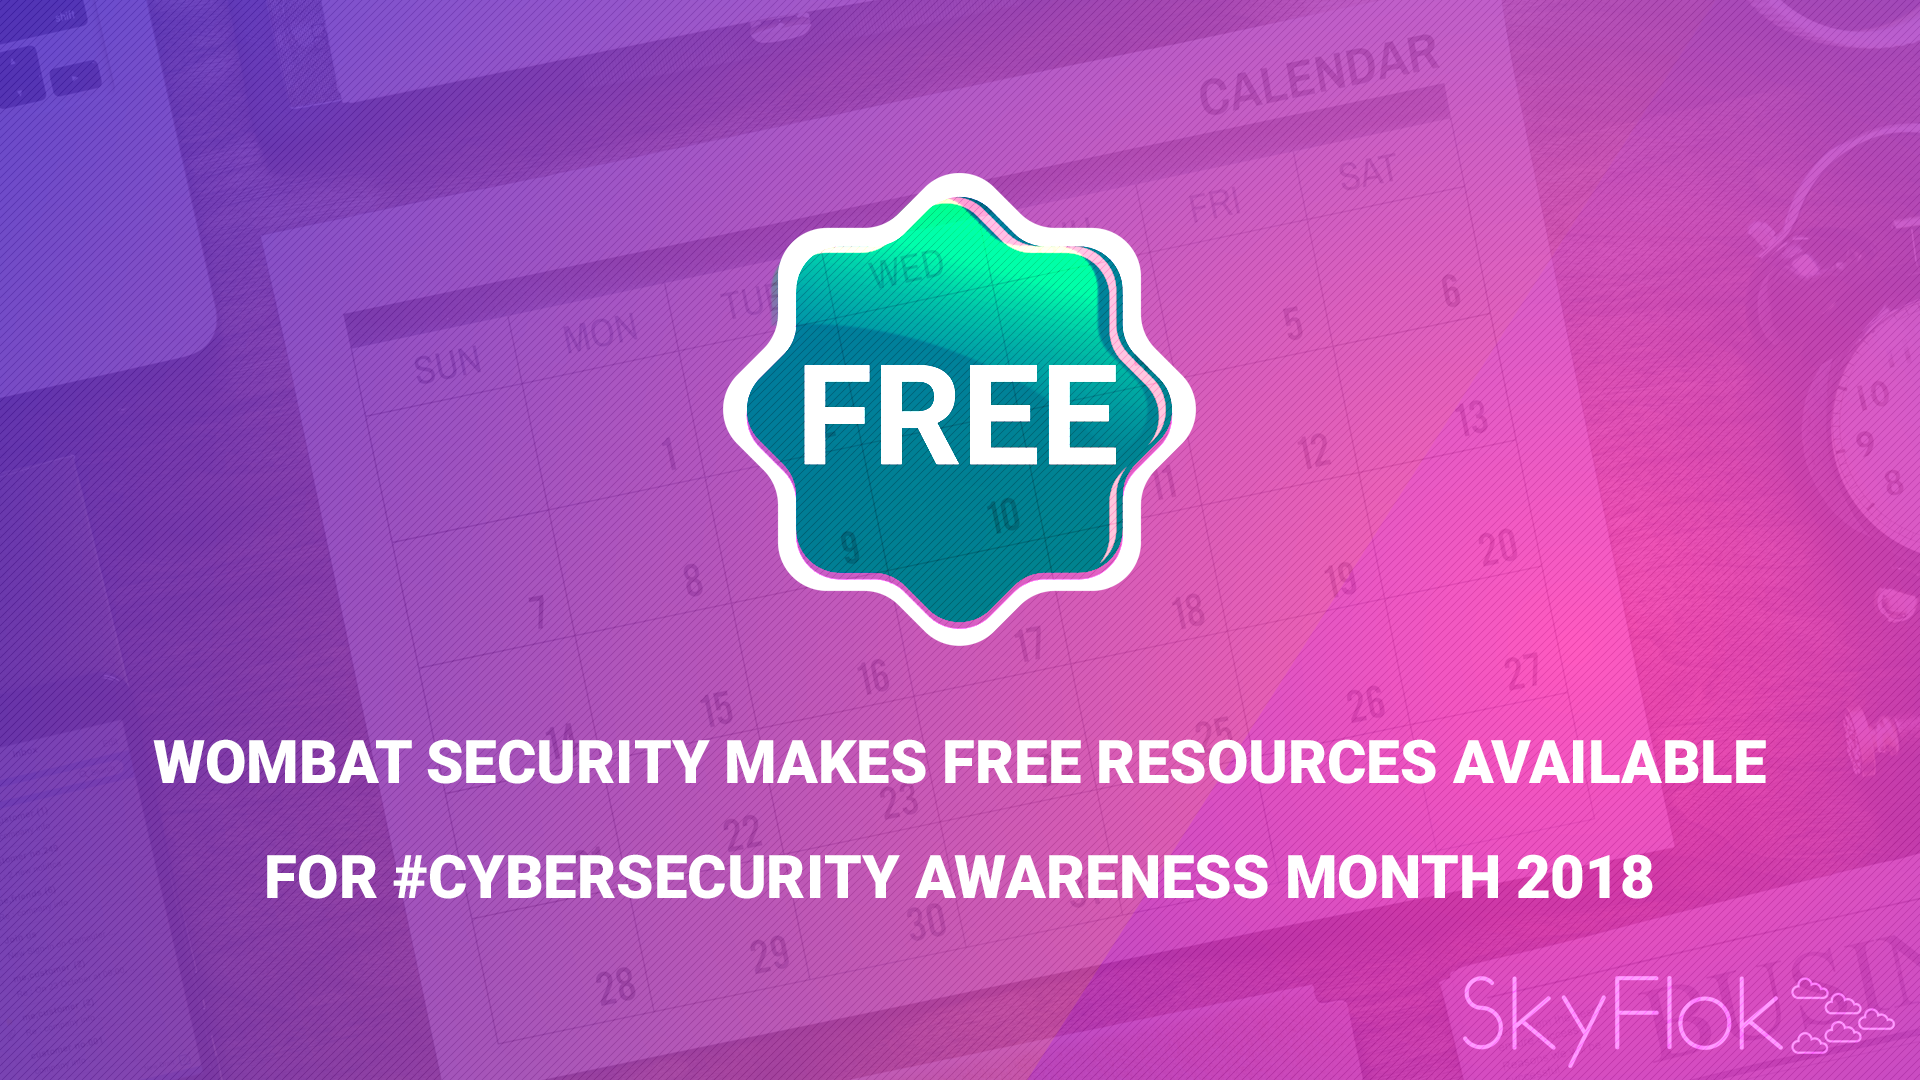 Wombat Security Makes Free Resources Available for #Cybersecurity Awareness Month 2018